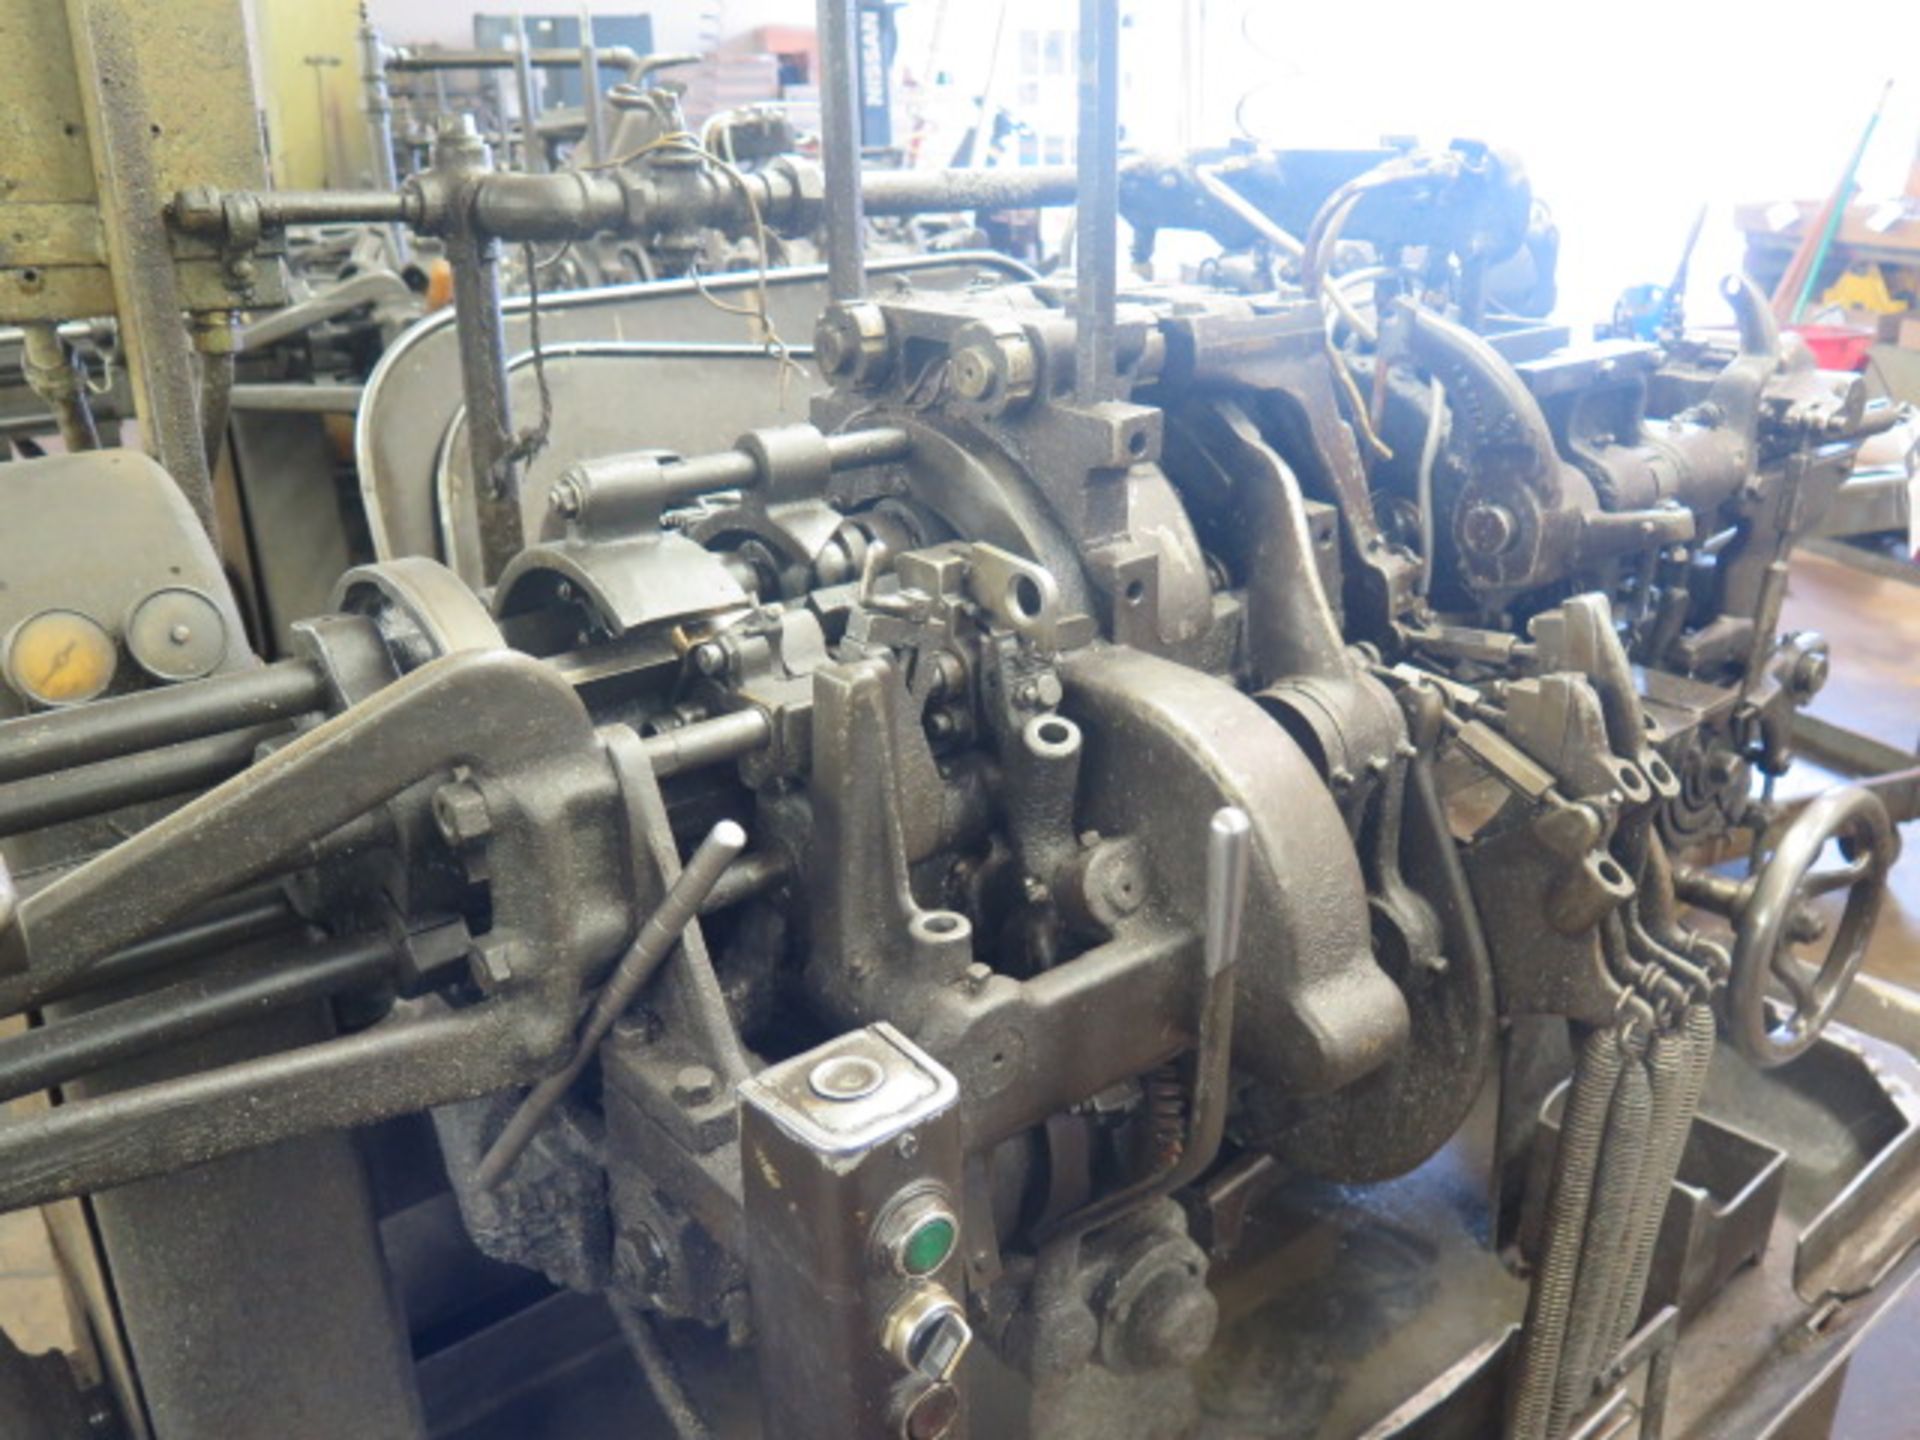 Davenport mdl. B 5-Spindle Automatic Screw Machine s/n 2935 w/ 4-Cross Slides, 5th Attachment Arm, - Image 5 of 9